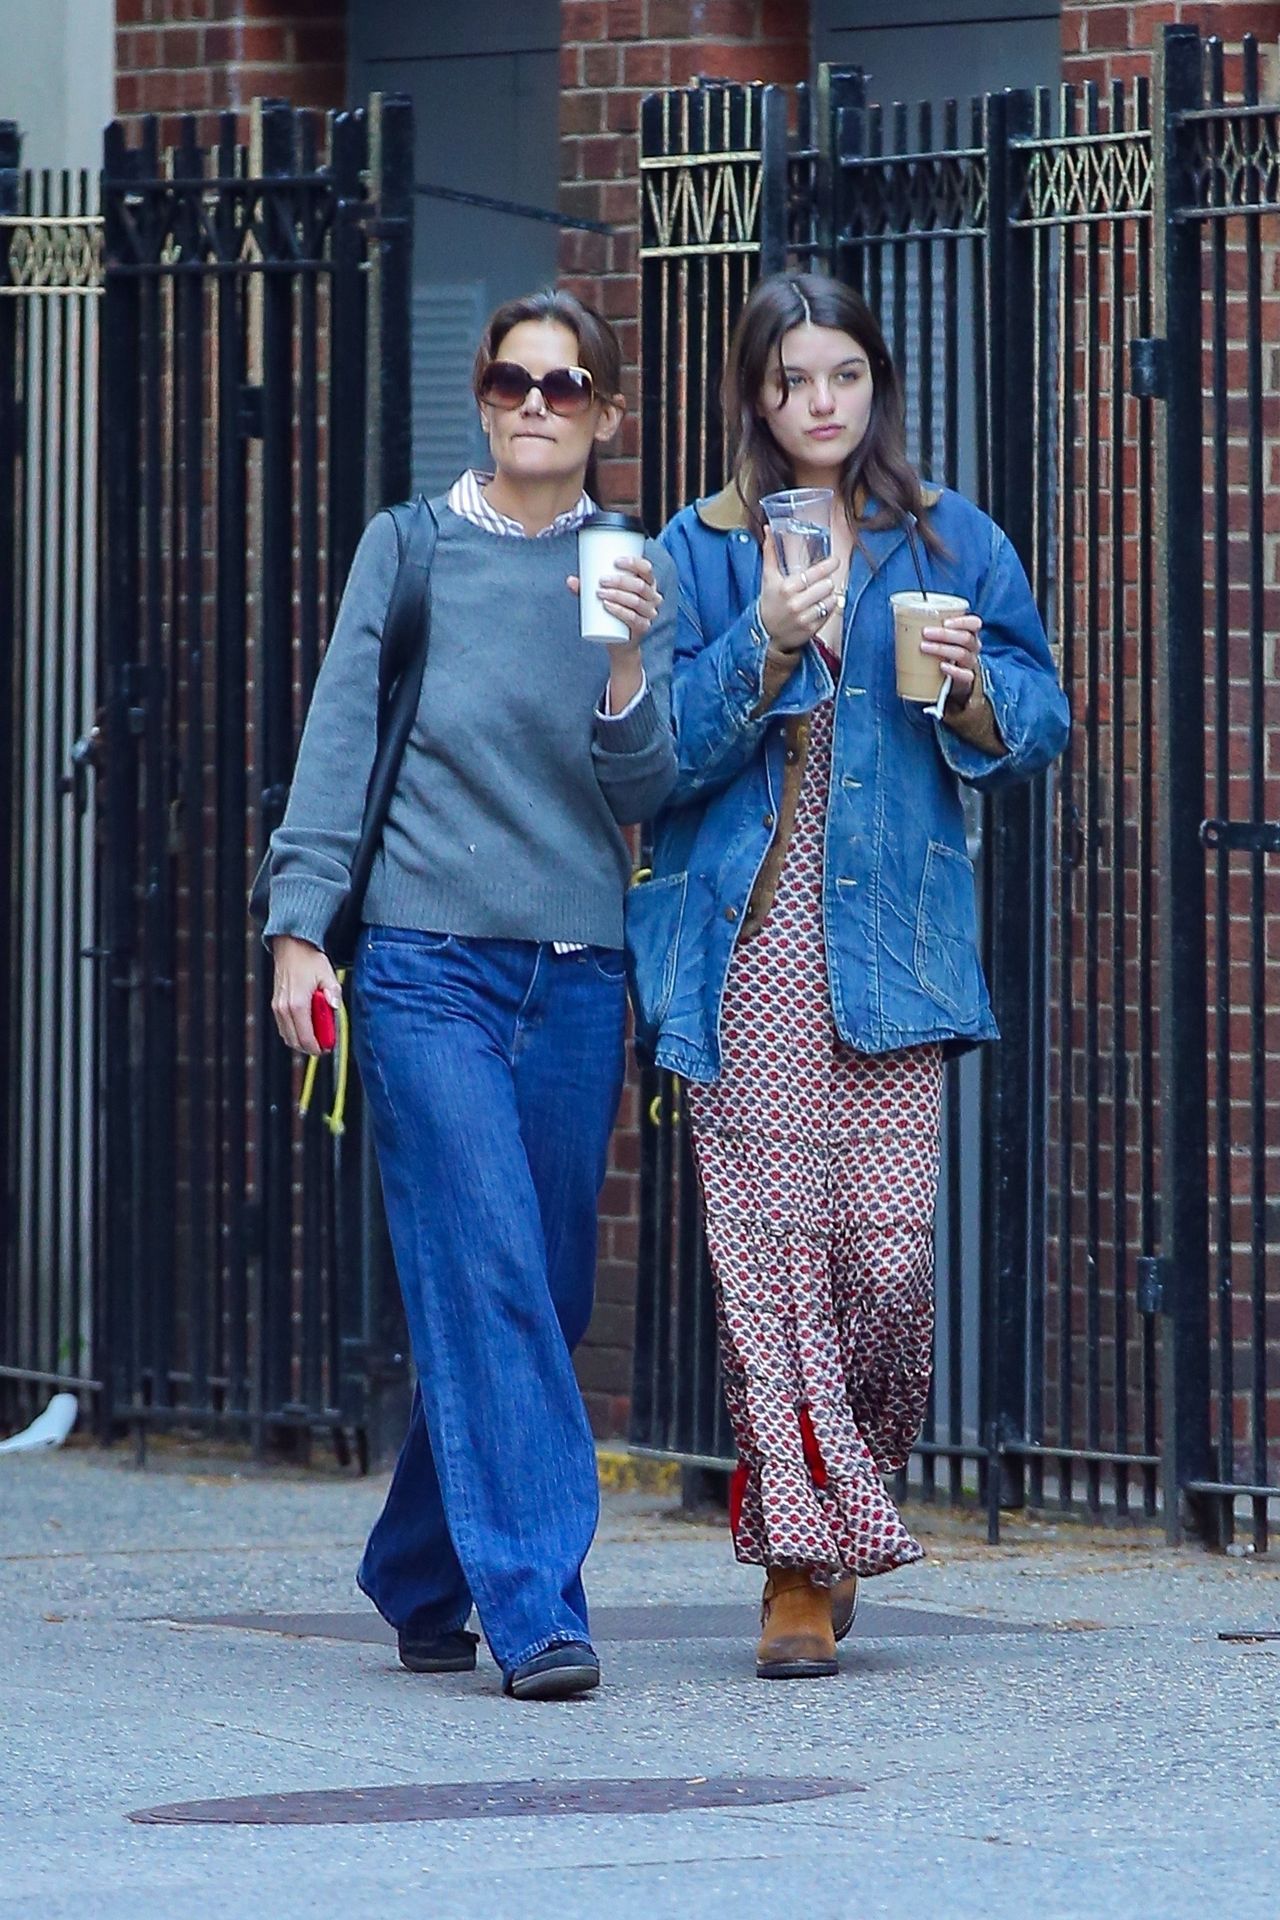 Katie Holmes and Suri Cruise "spotted" in New York